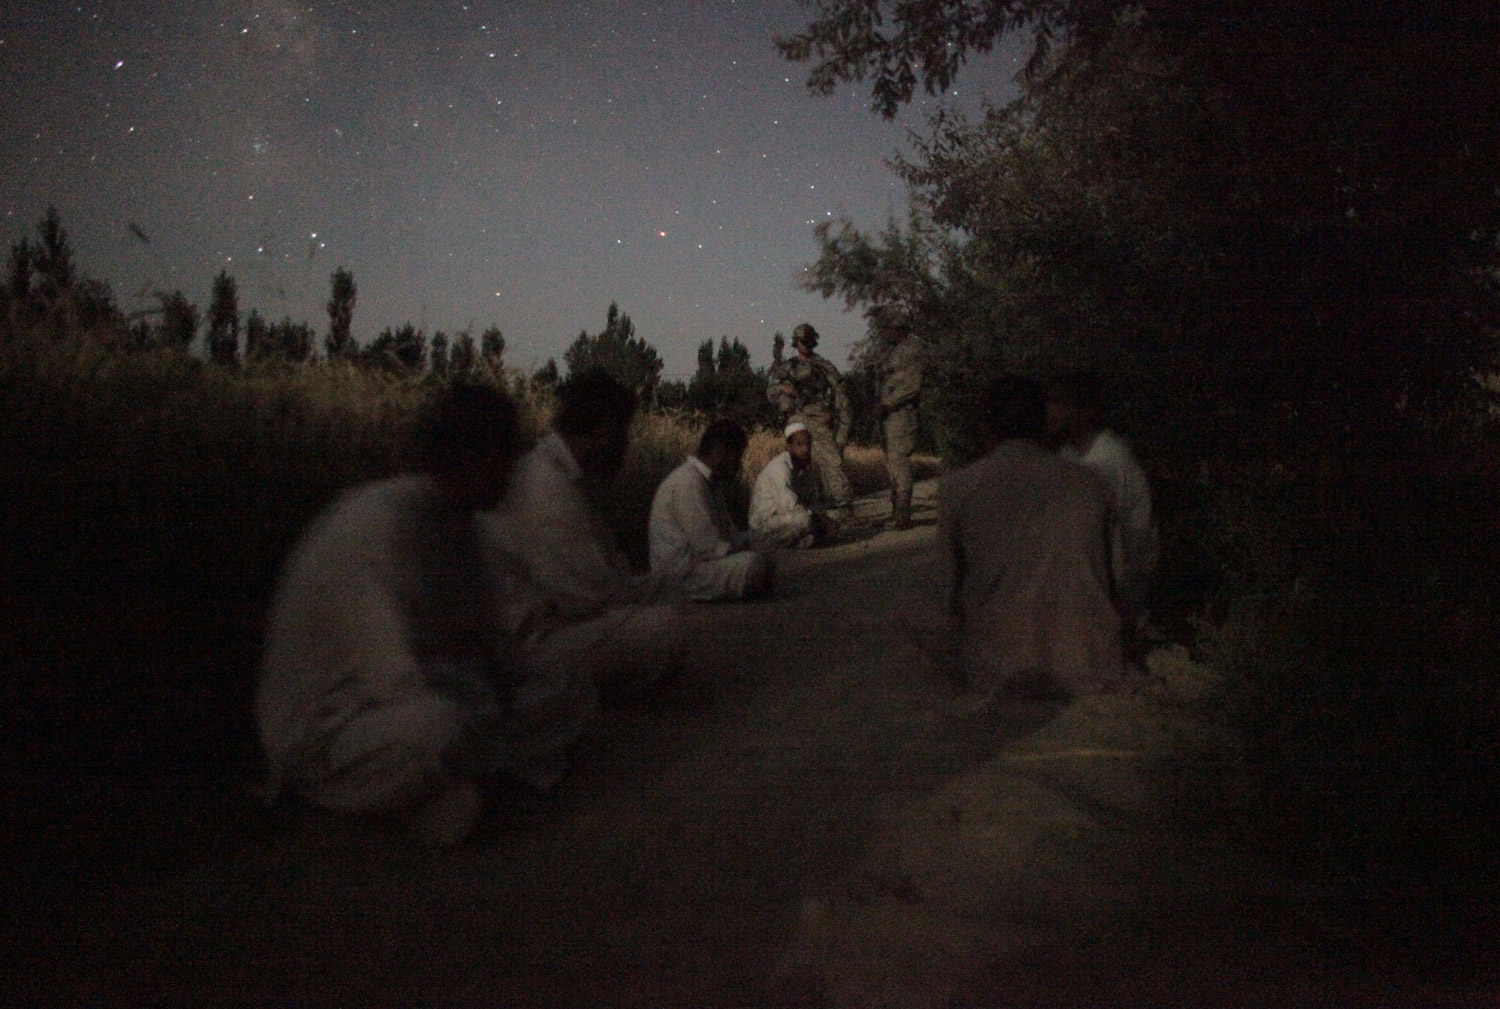 Michael Kamber, July 16, 2009
                               I think many of us took some really terrible photos in Afghanistan: bodies torn up by bombs, ripped apart by bullets. But this photo always disturbed me—placid though it is. We were on a night mission and these American soldiers went door to door pulling men from their beds in front of their screaming children, putting them on the ground in the freezing cold, then marching them off under arrest. Maybe some of the men were insurgents, you almost never know when you're out there. But they were all released the next morning. As we hiked back to base around 5 a.m., the First Sergeant was sort of thinking out loud. 'Boy, we sure didn't make any friends out there tonight,' he said.